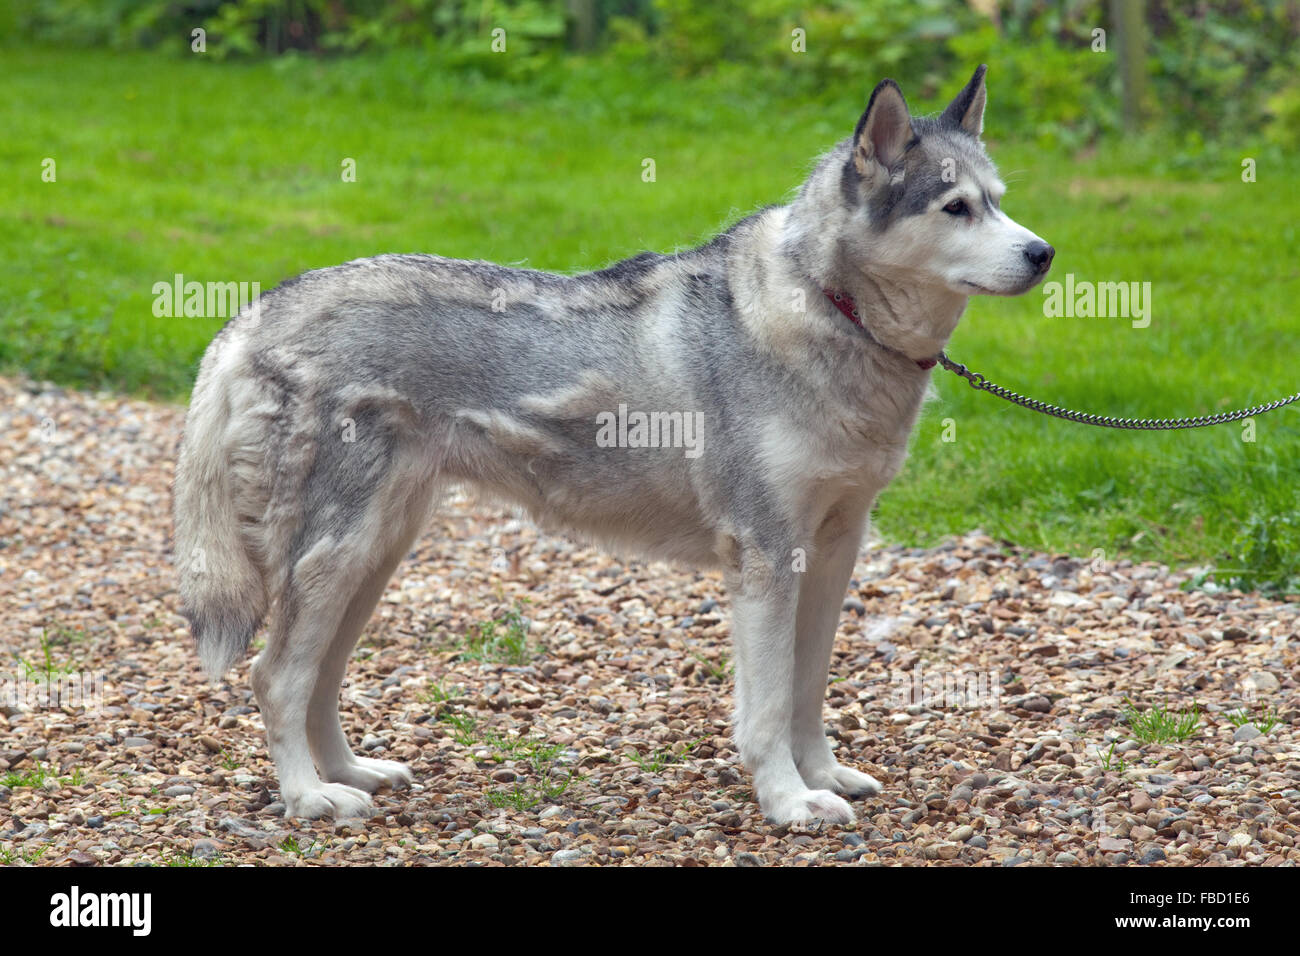 Siberian Husky Canis lupus familiaris. Domestic dog. Coat in moult. New, shorter darker, replacement hairs showing through. Stock Photo